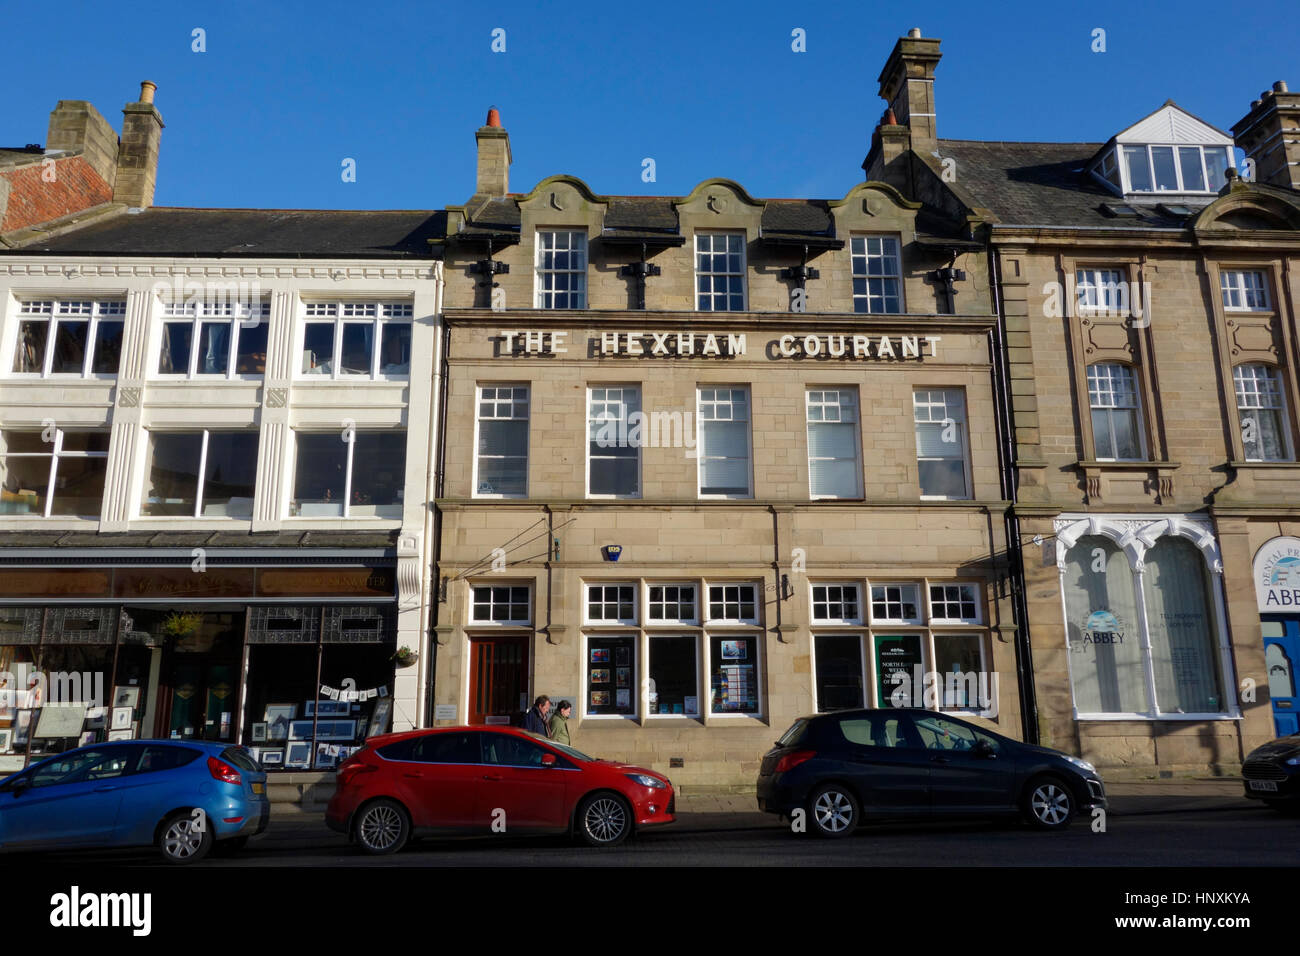 The offices of The Hexham Courant newspaper Stock Photo